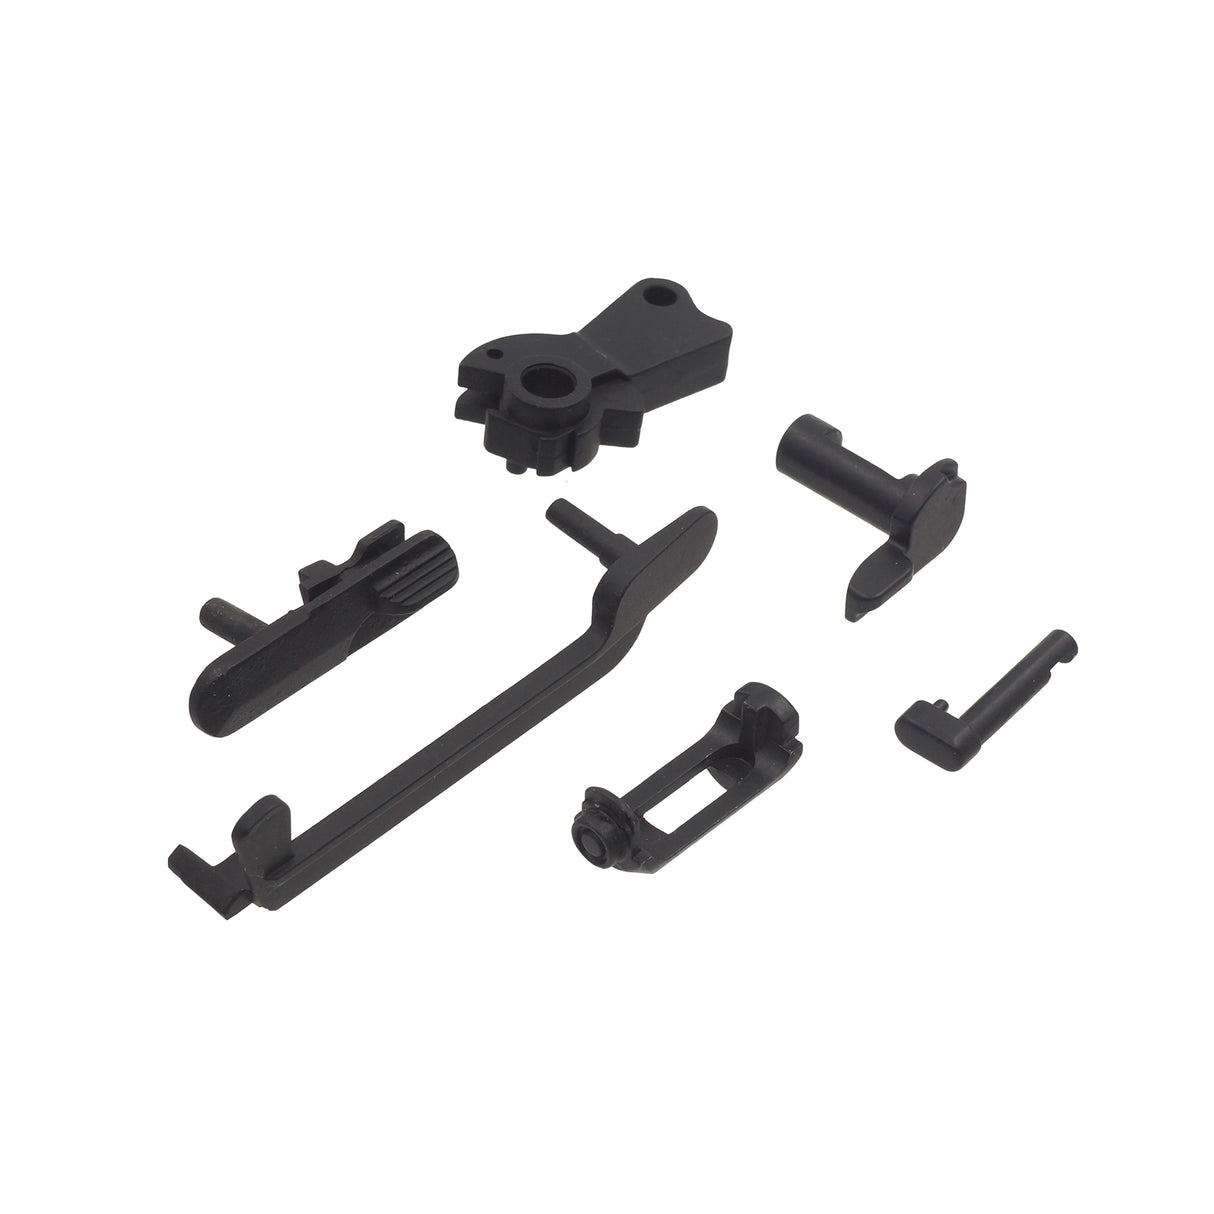 Double Bell Original Replacement Hammer Parts for 736 M9 GBB ( M9-JLZ )